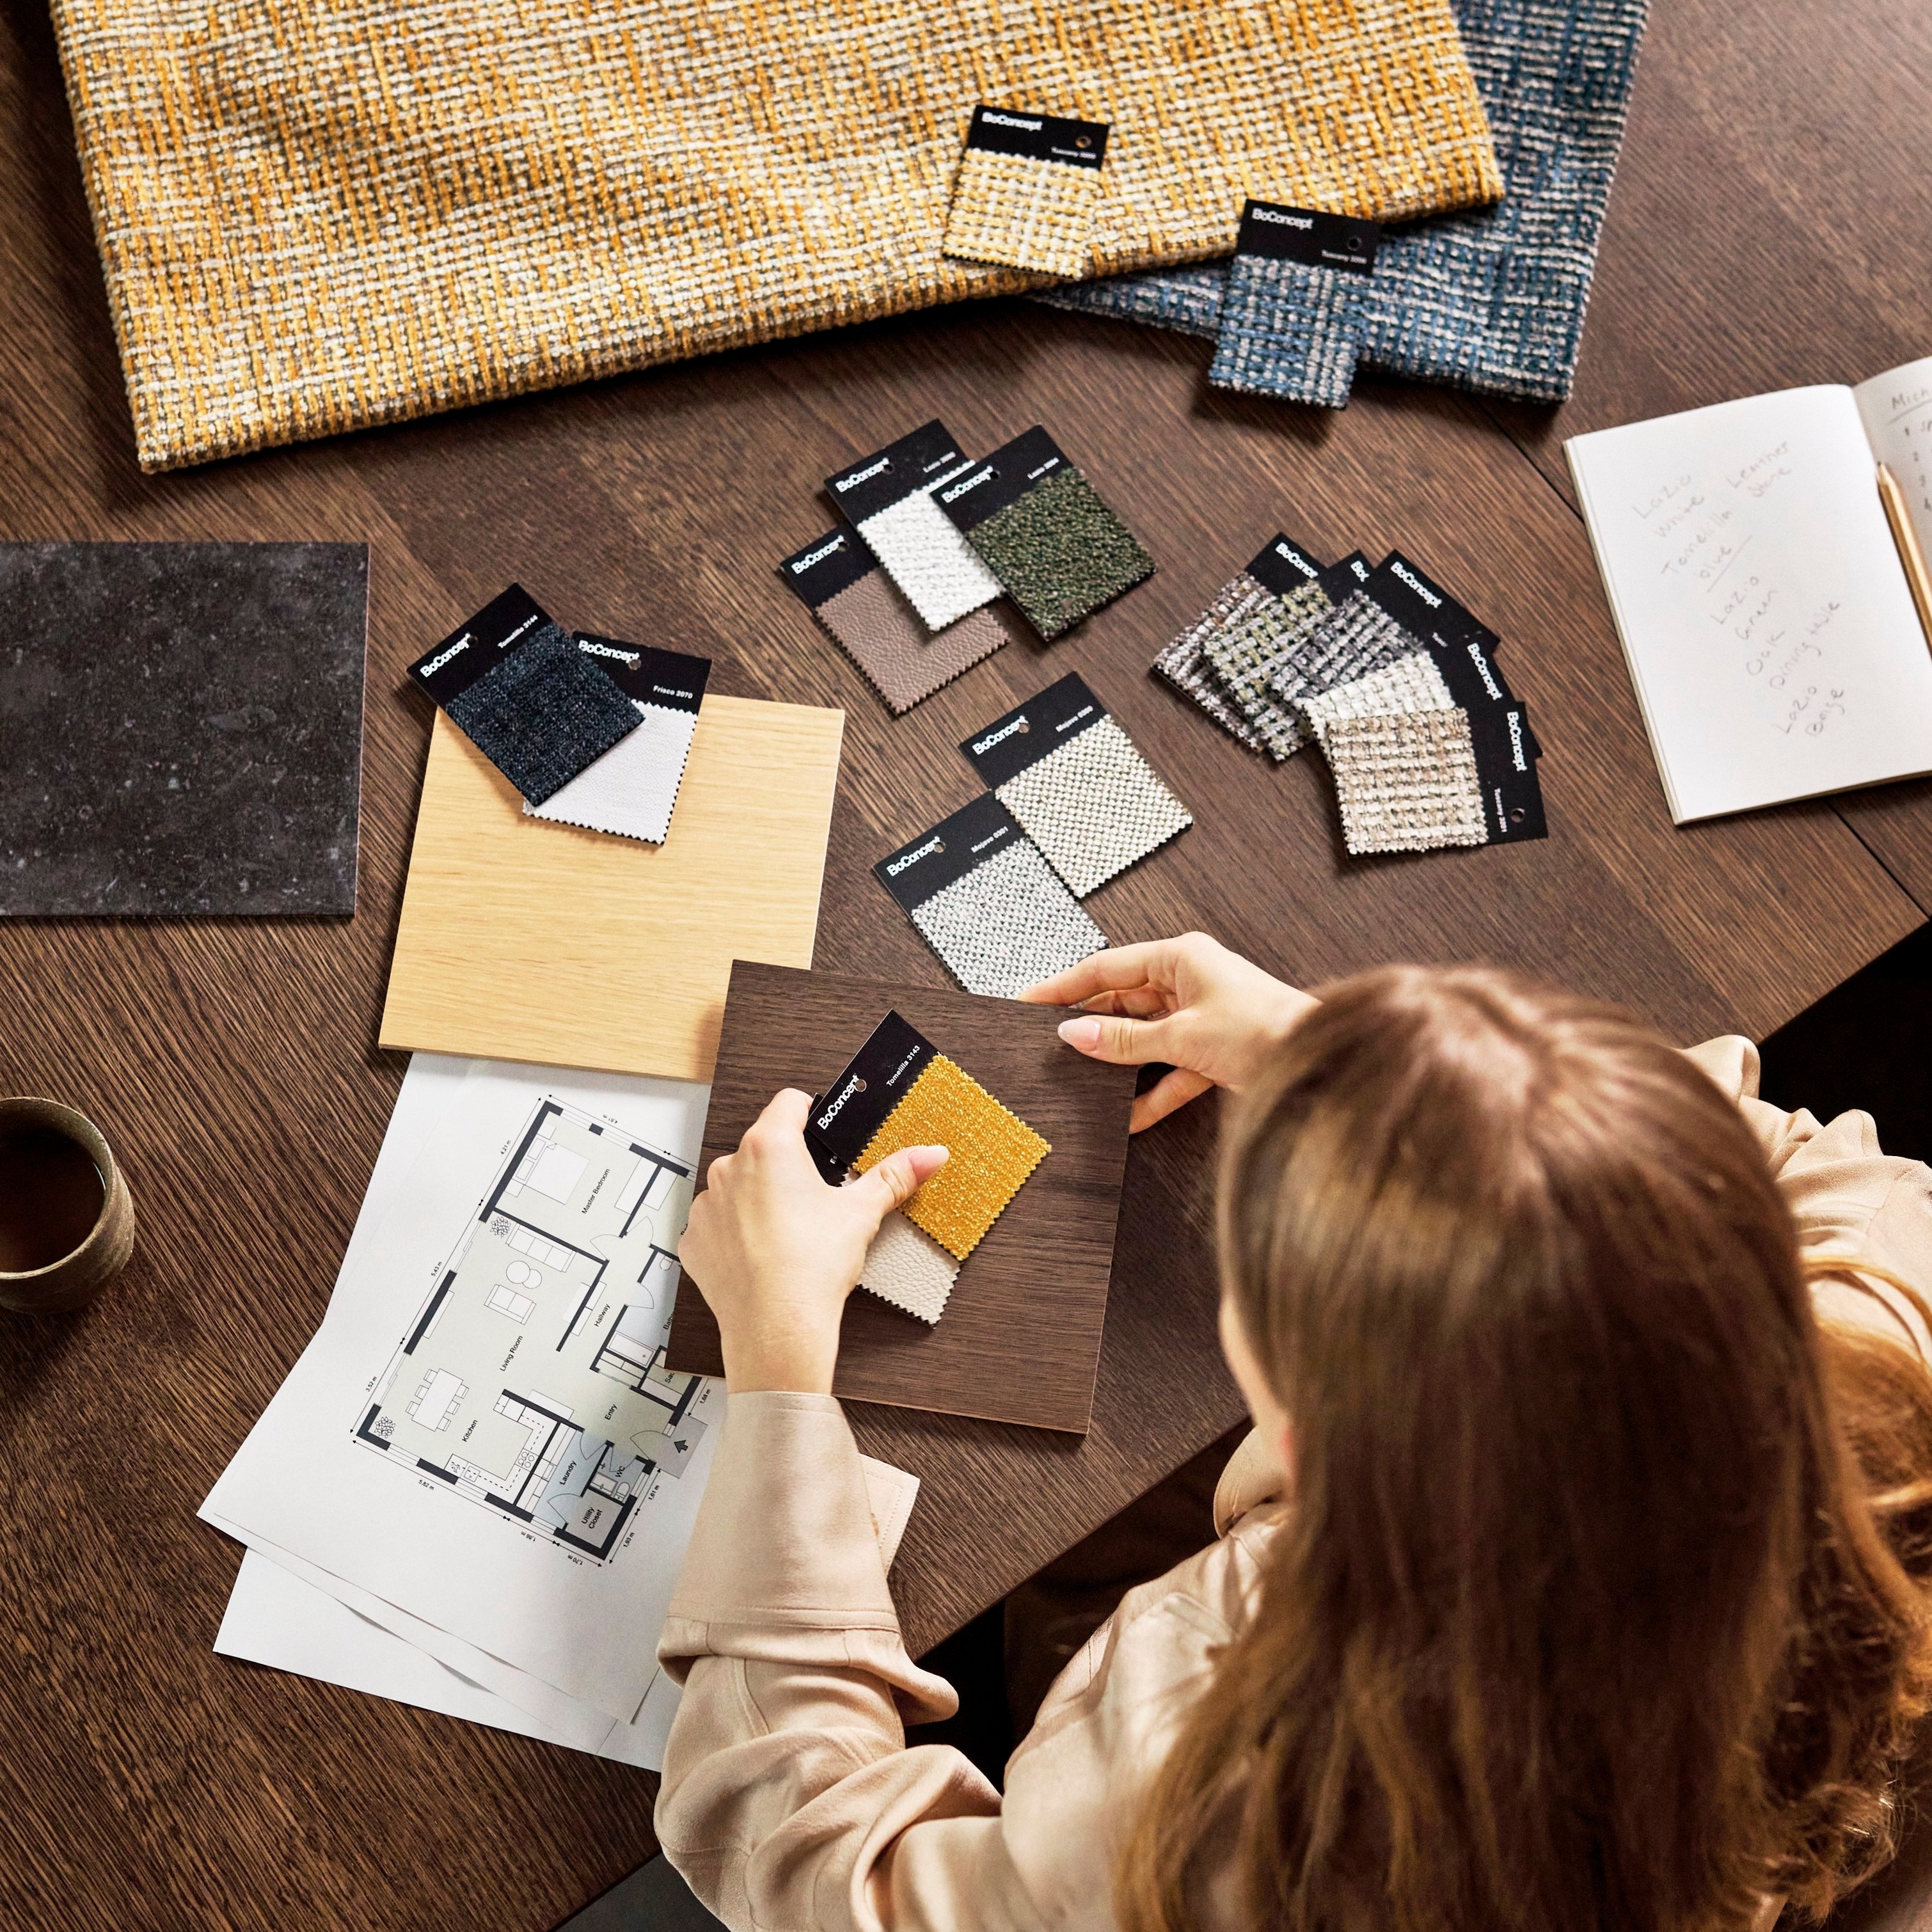 Designer choosing fabric samples on a wooden table with floor plan and notes.